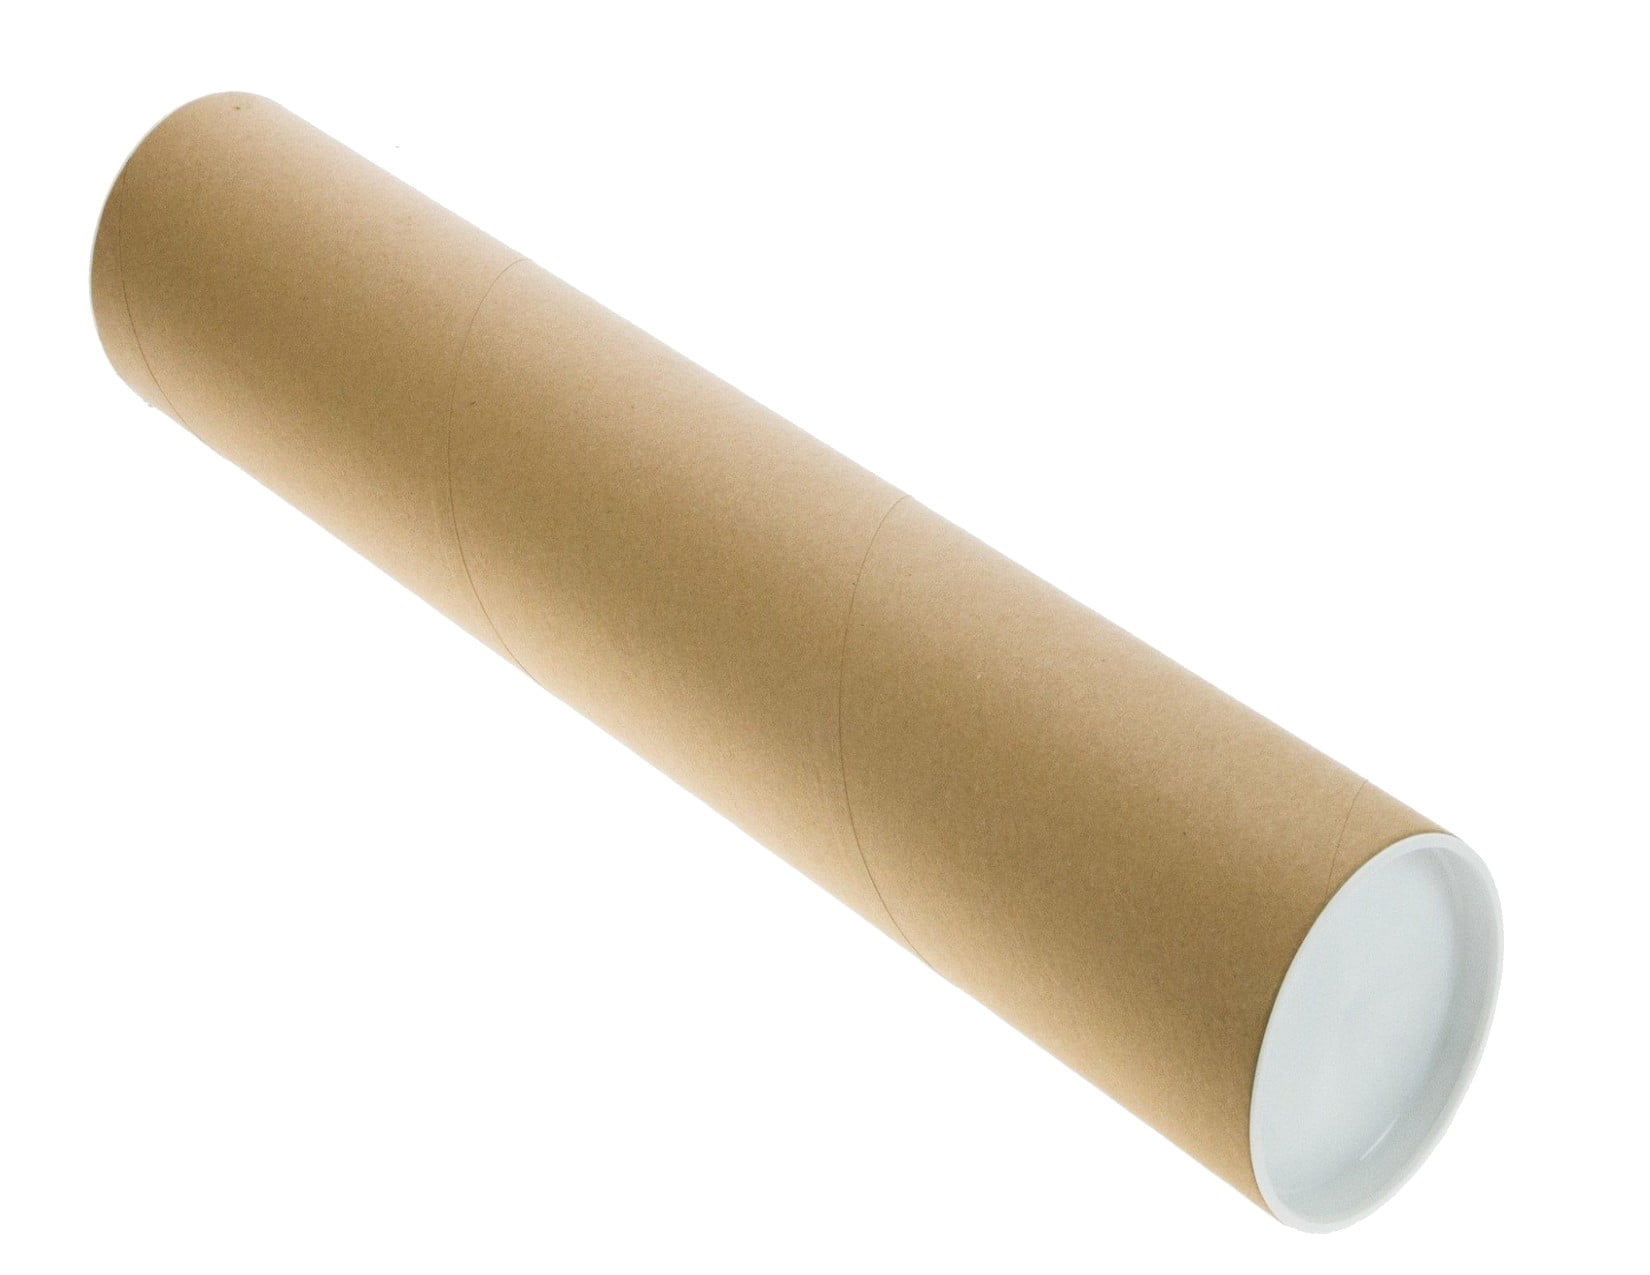 2 Pack Mailing Tubes with Caps 2-inch x 26 inch usable Length